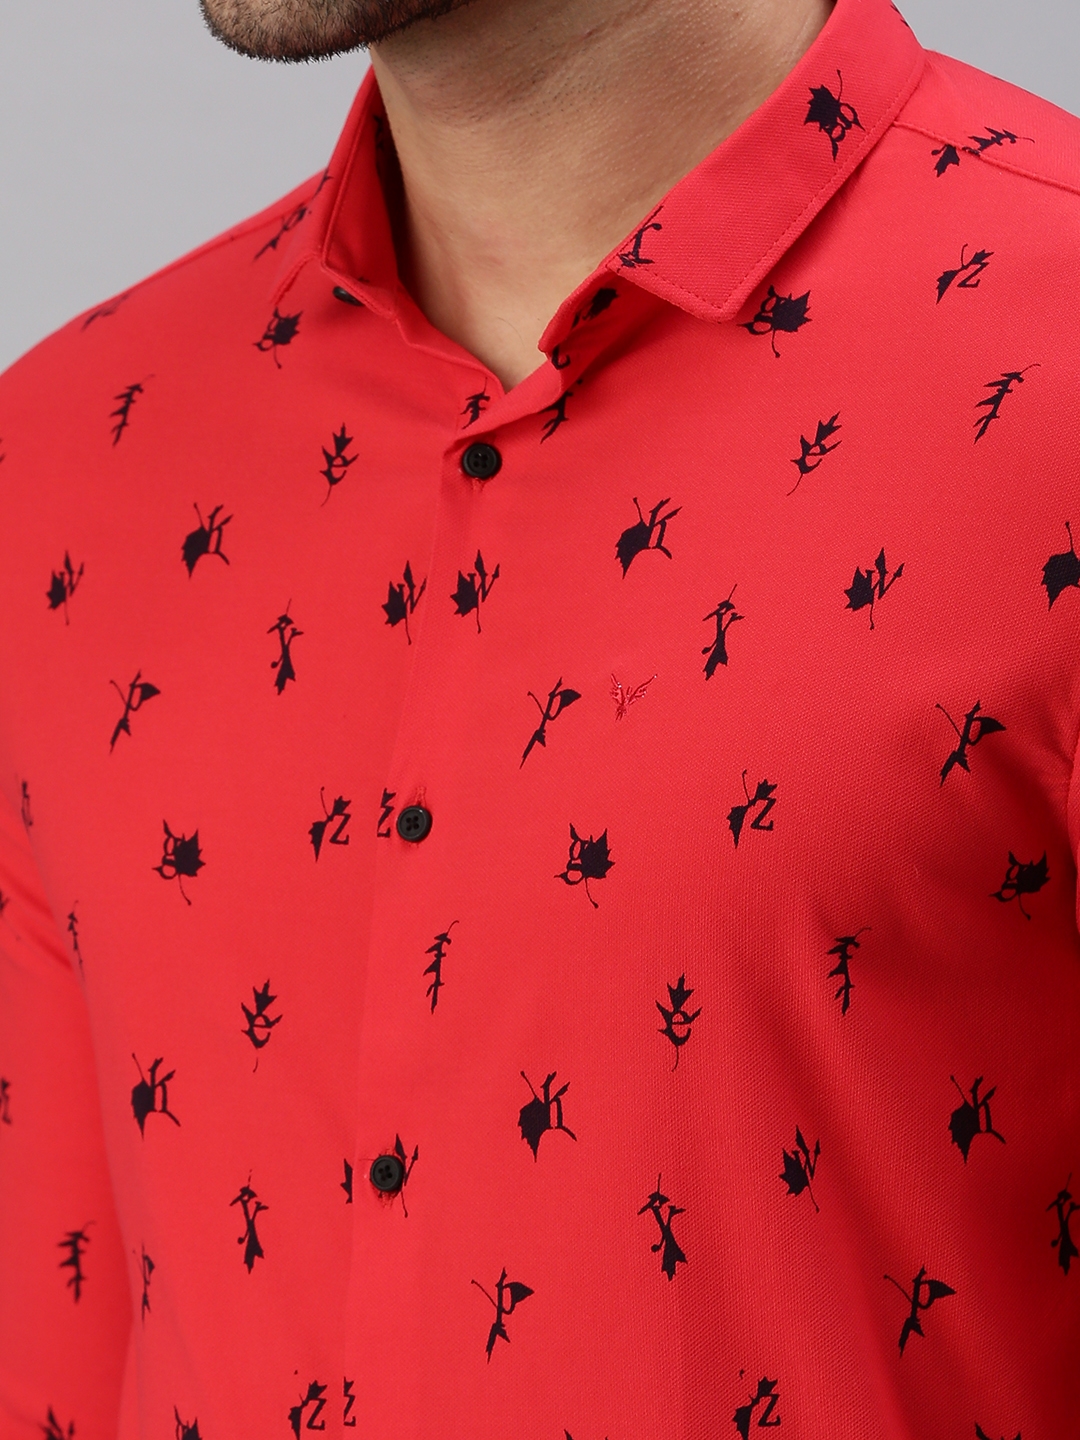 Men's Red Cotton Printed Casual Shirts